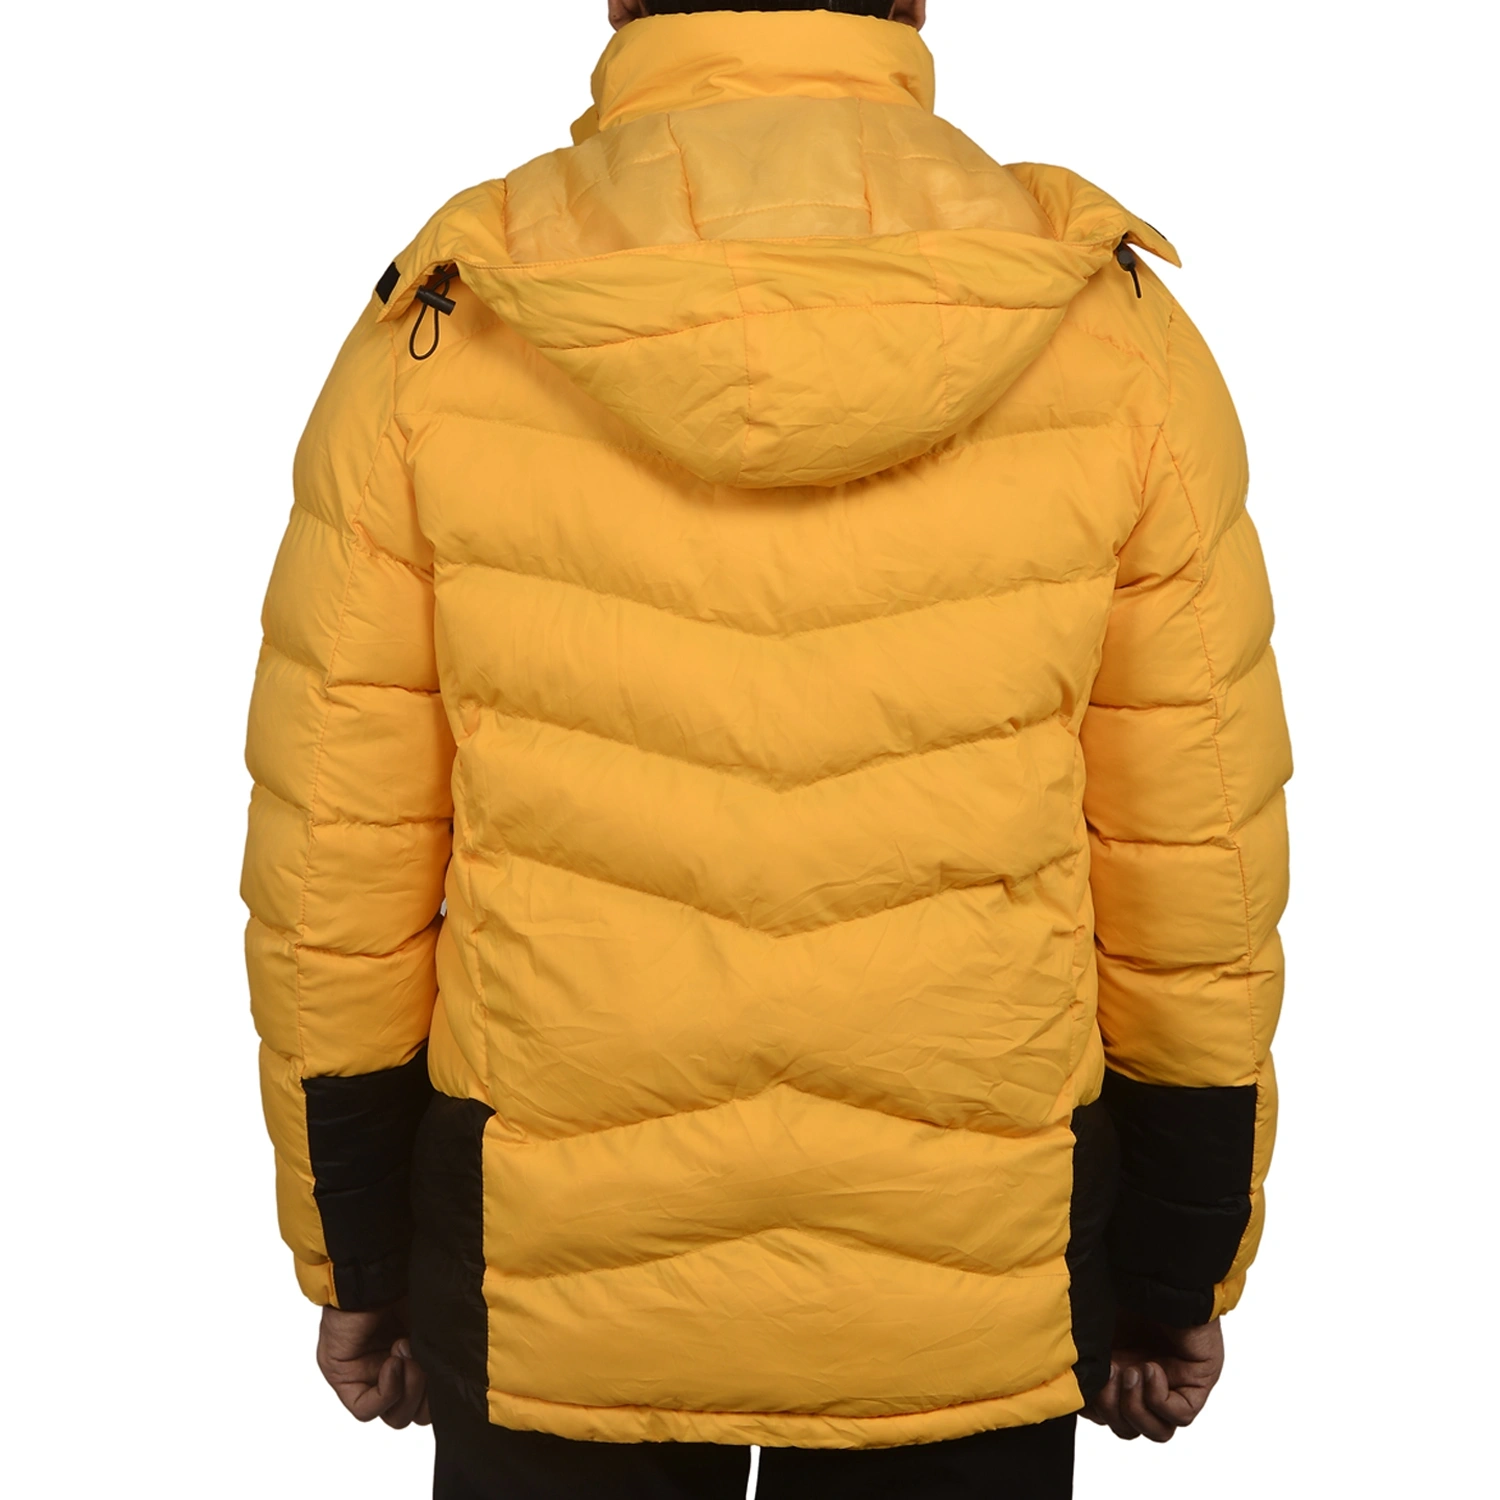 K2 Survivor Down Jacket for Men: Stylized Functionality for Extreme Cold Weather Expeditions (Up to -20°C)-XXL-Yellow-4